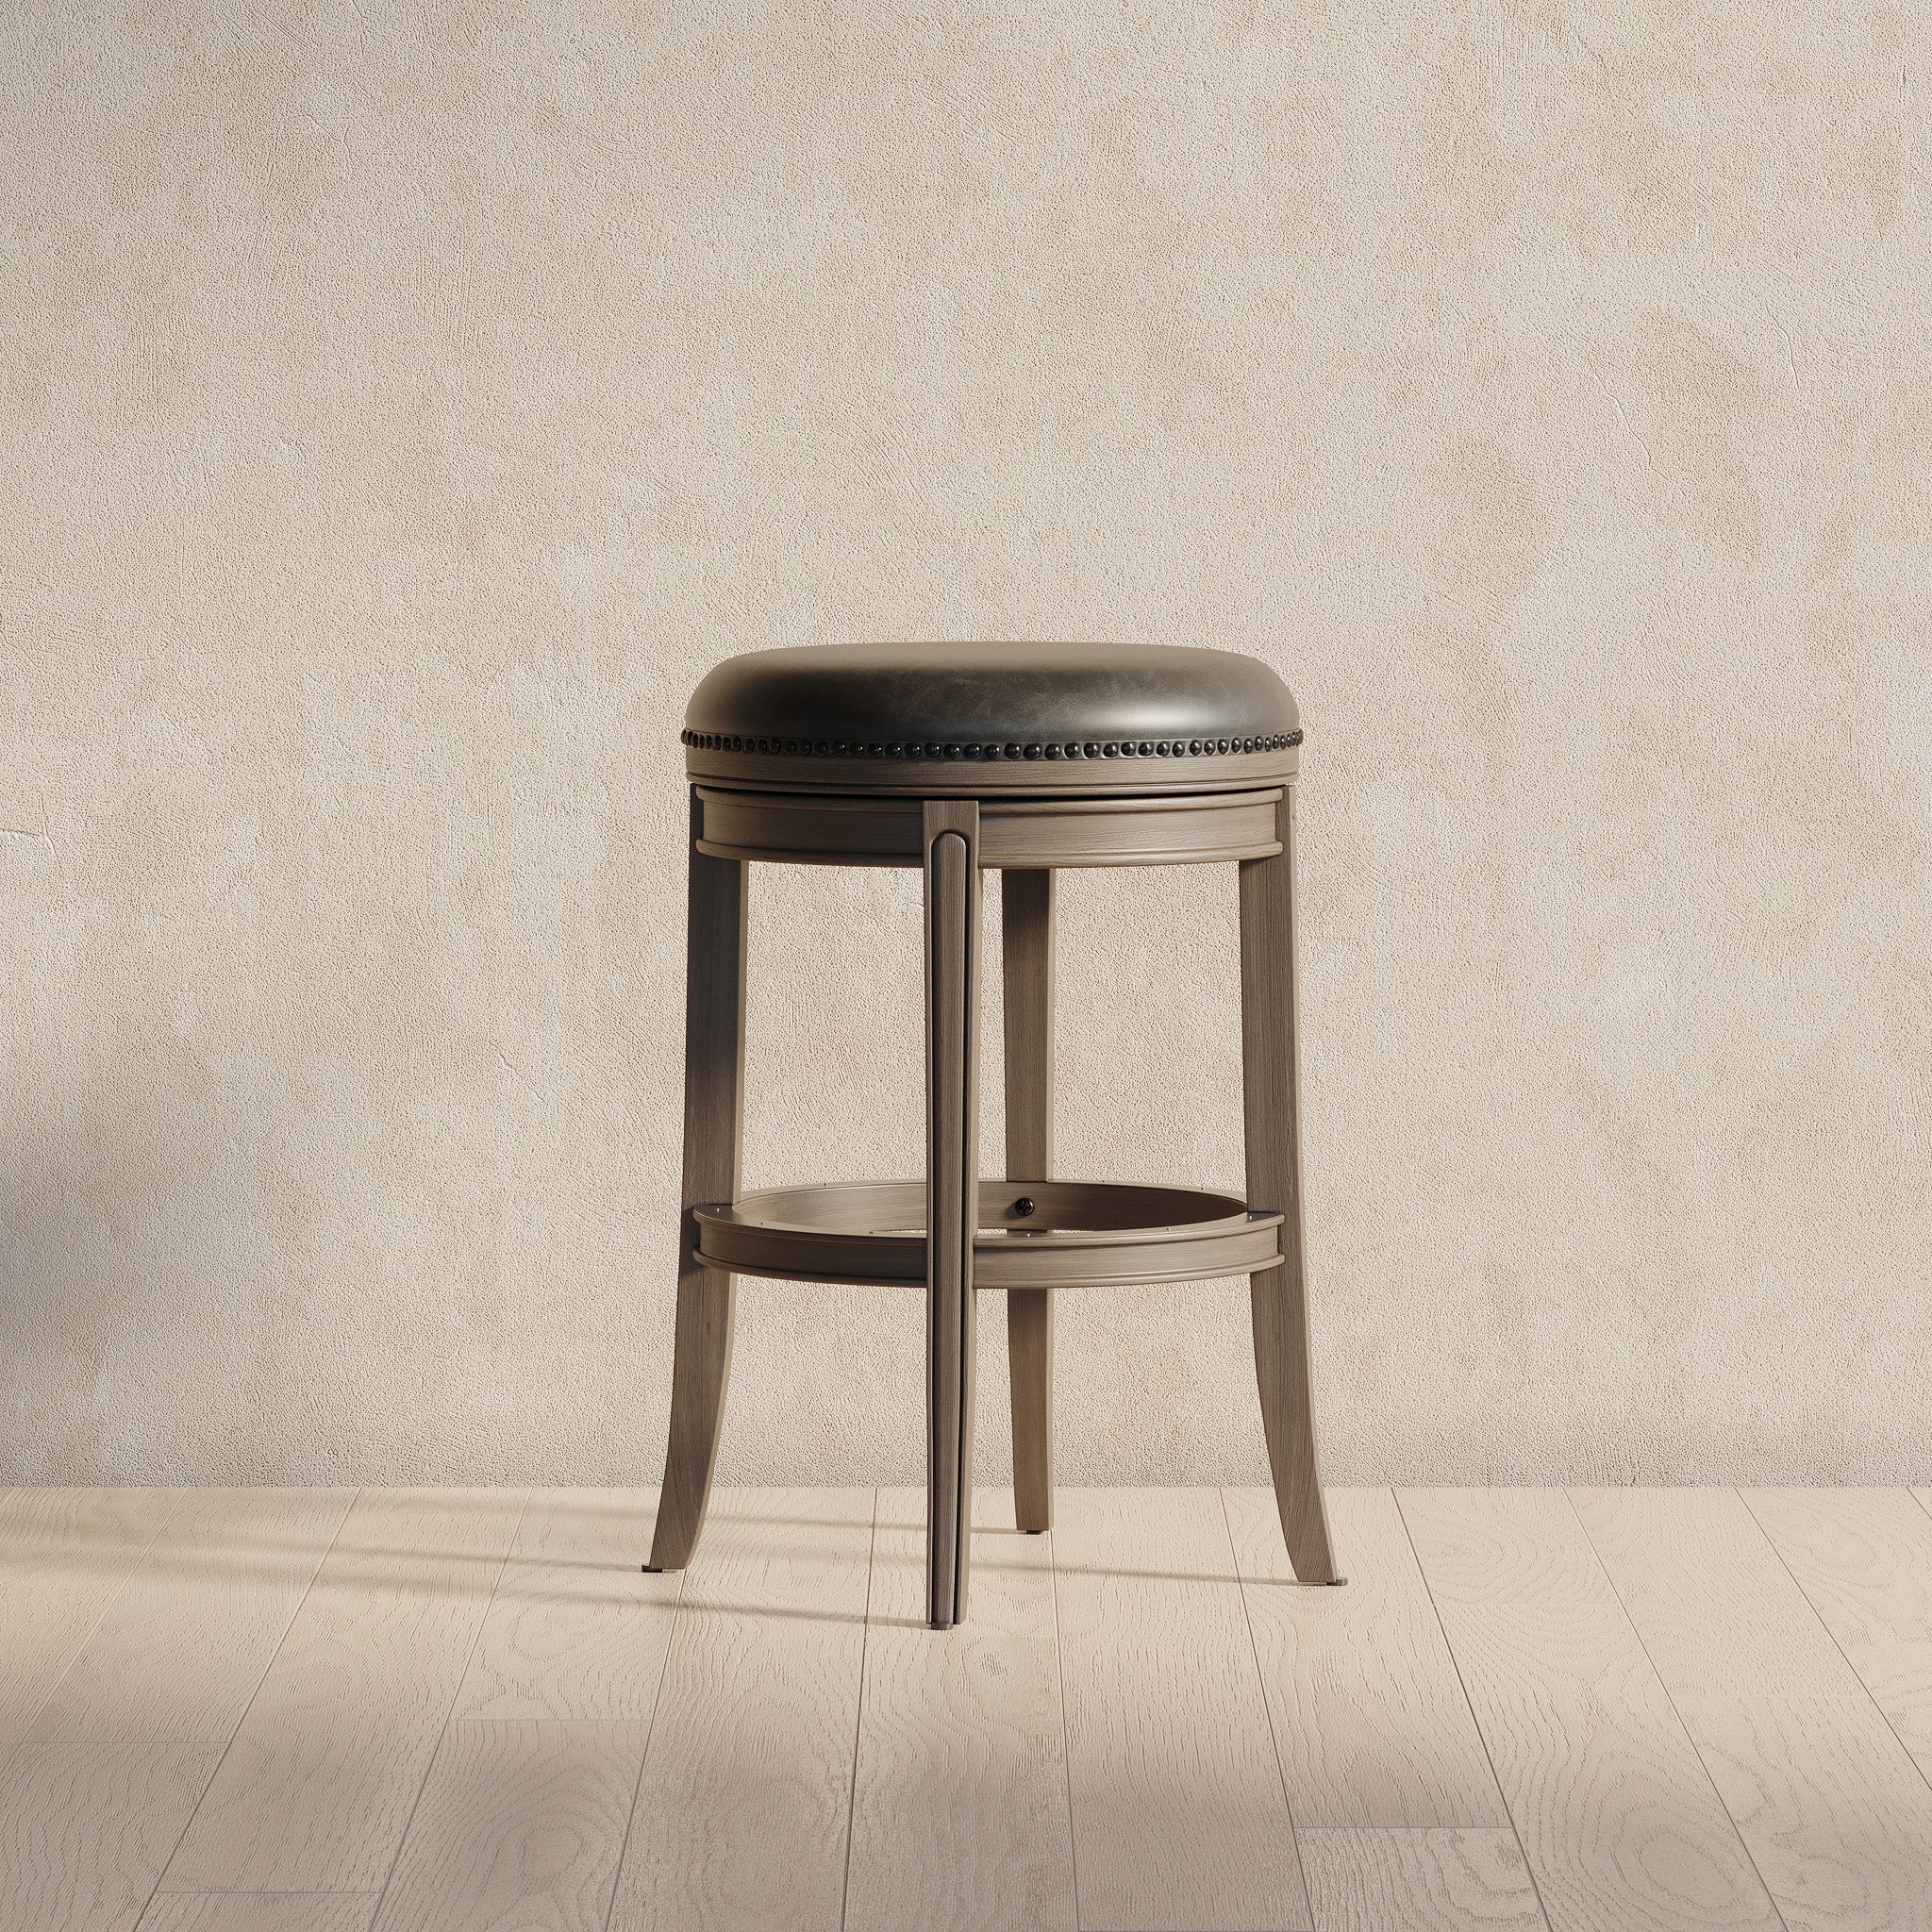 Alexander Backless Bar Stool in Reclaimed Oak Finish with Ronan Stone Vegan Leather in Stools by Maven Lane